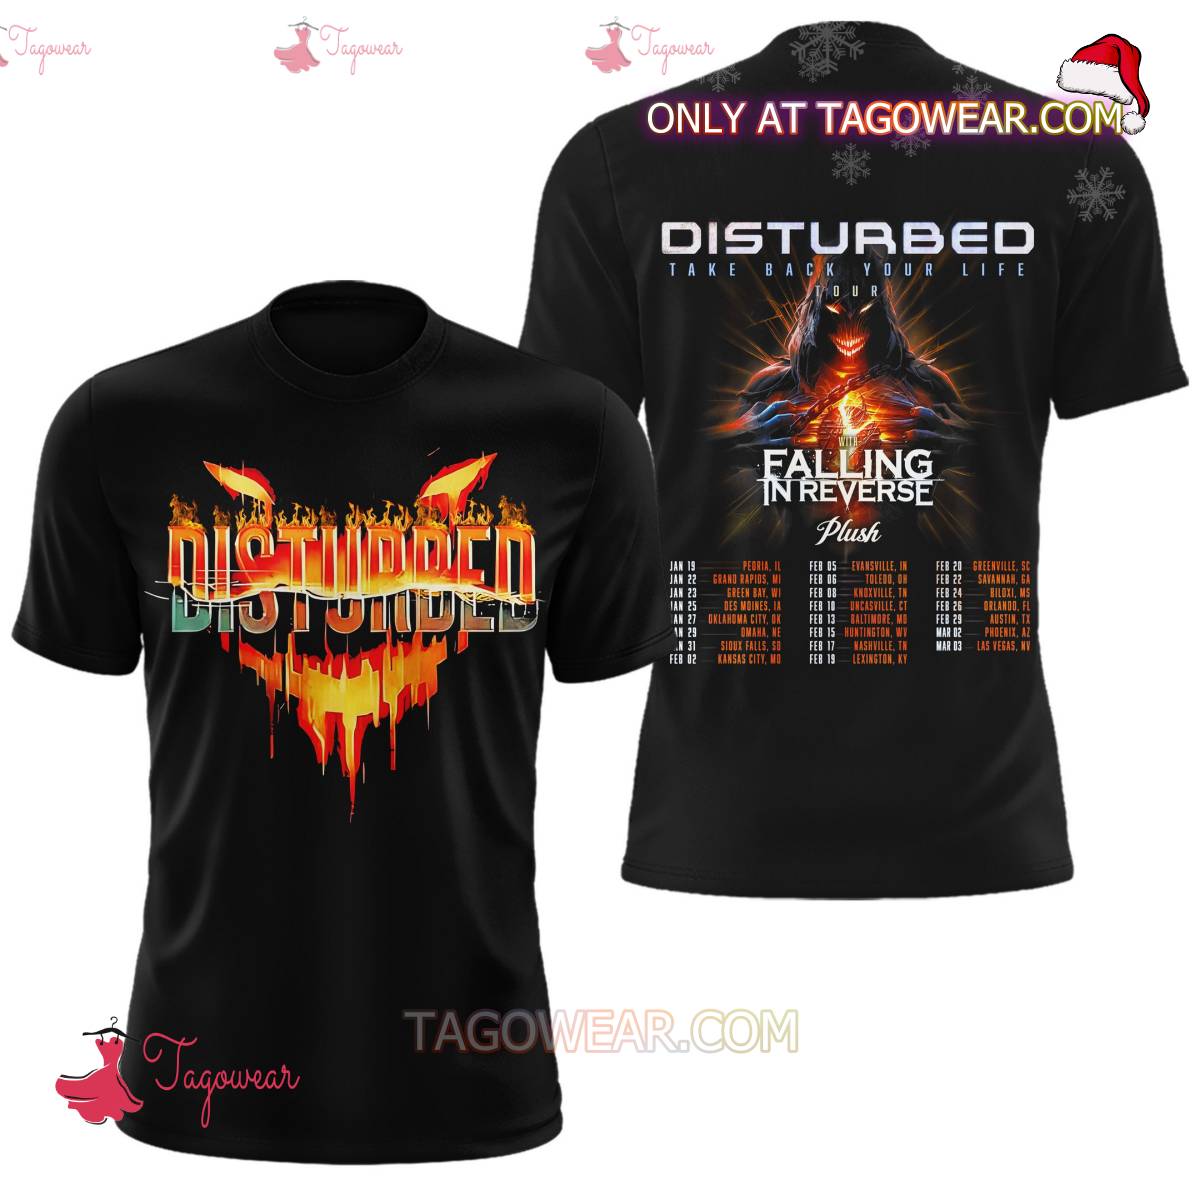 Disturbed Take Back Your Life Tour With Falling In Reverse T-shirt, Hoodie c